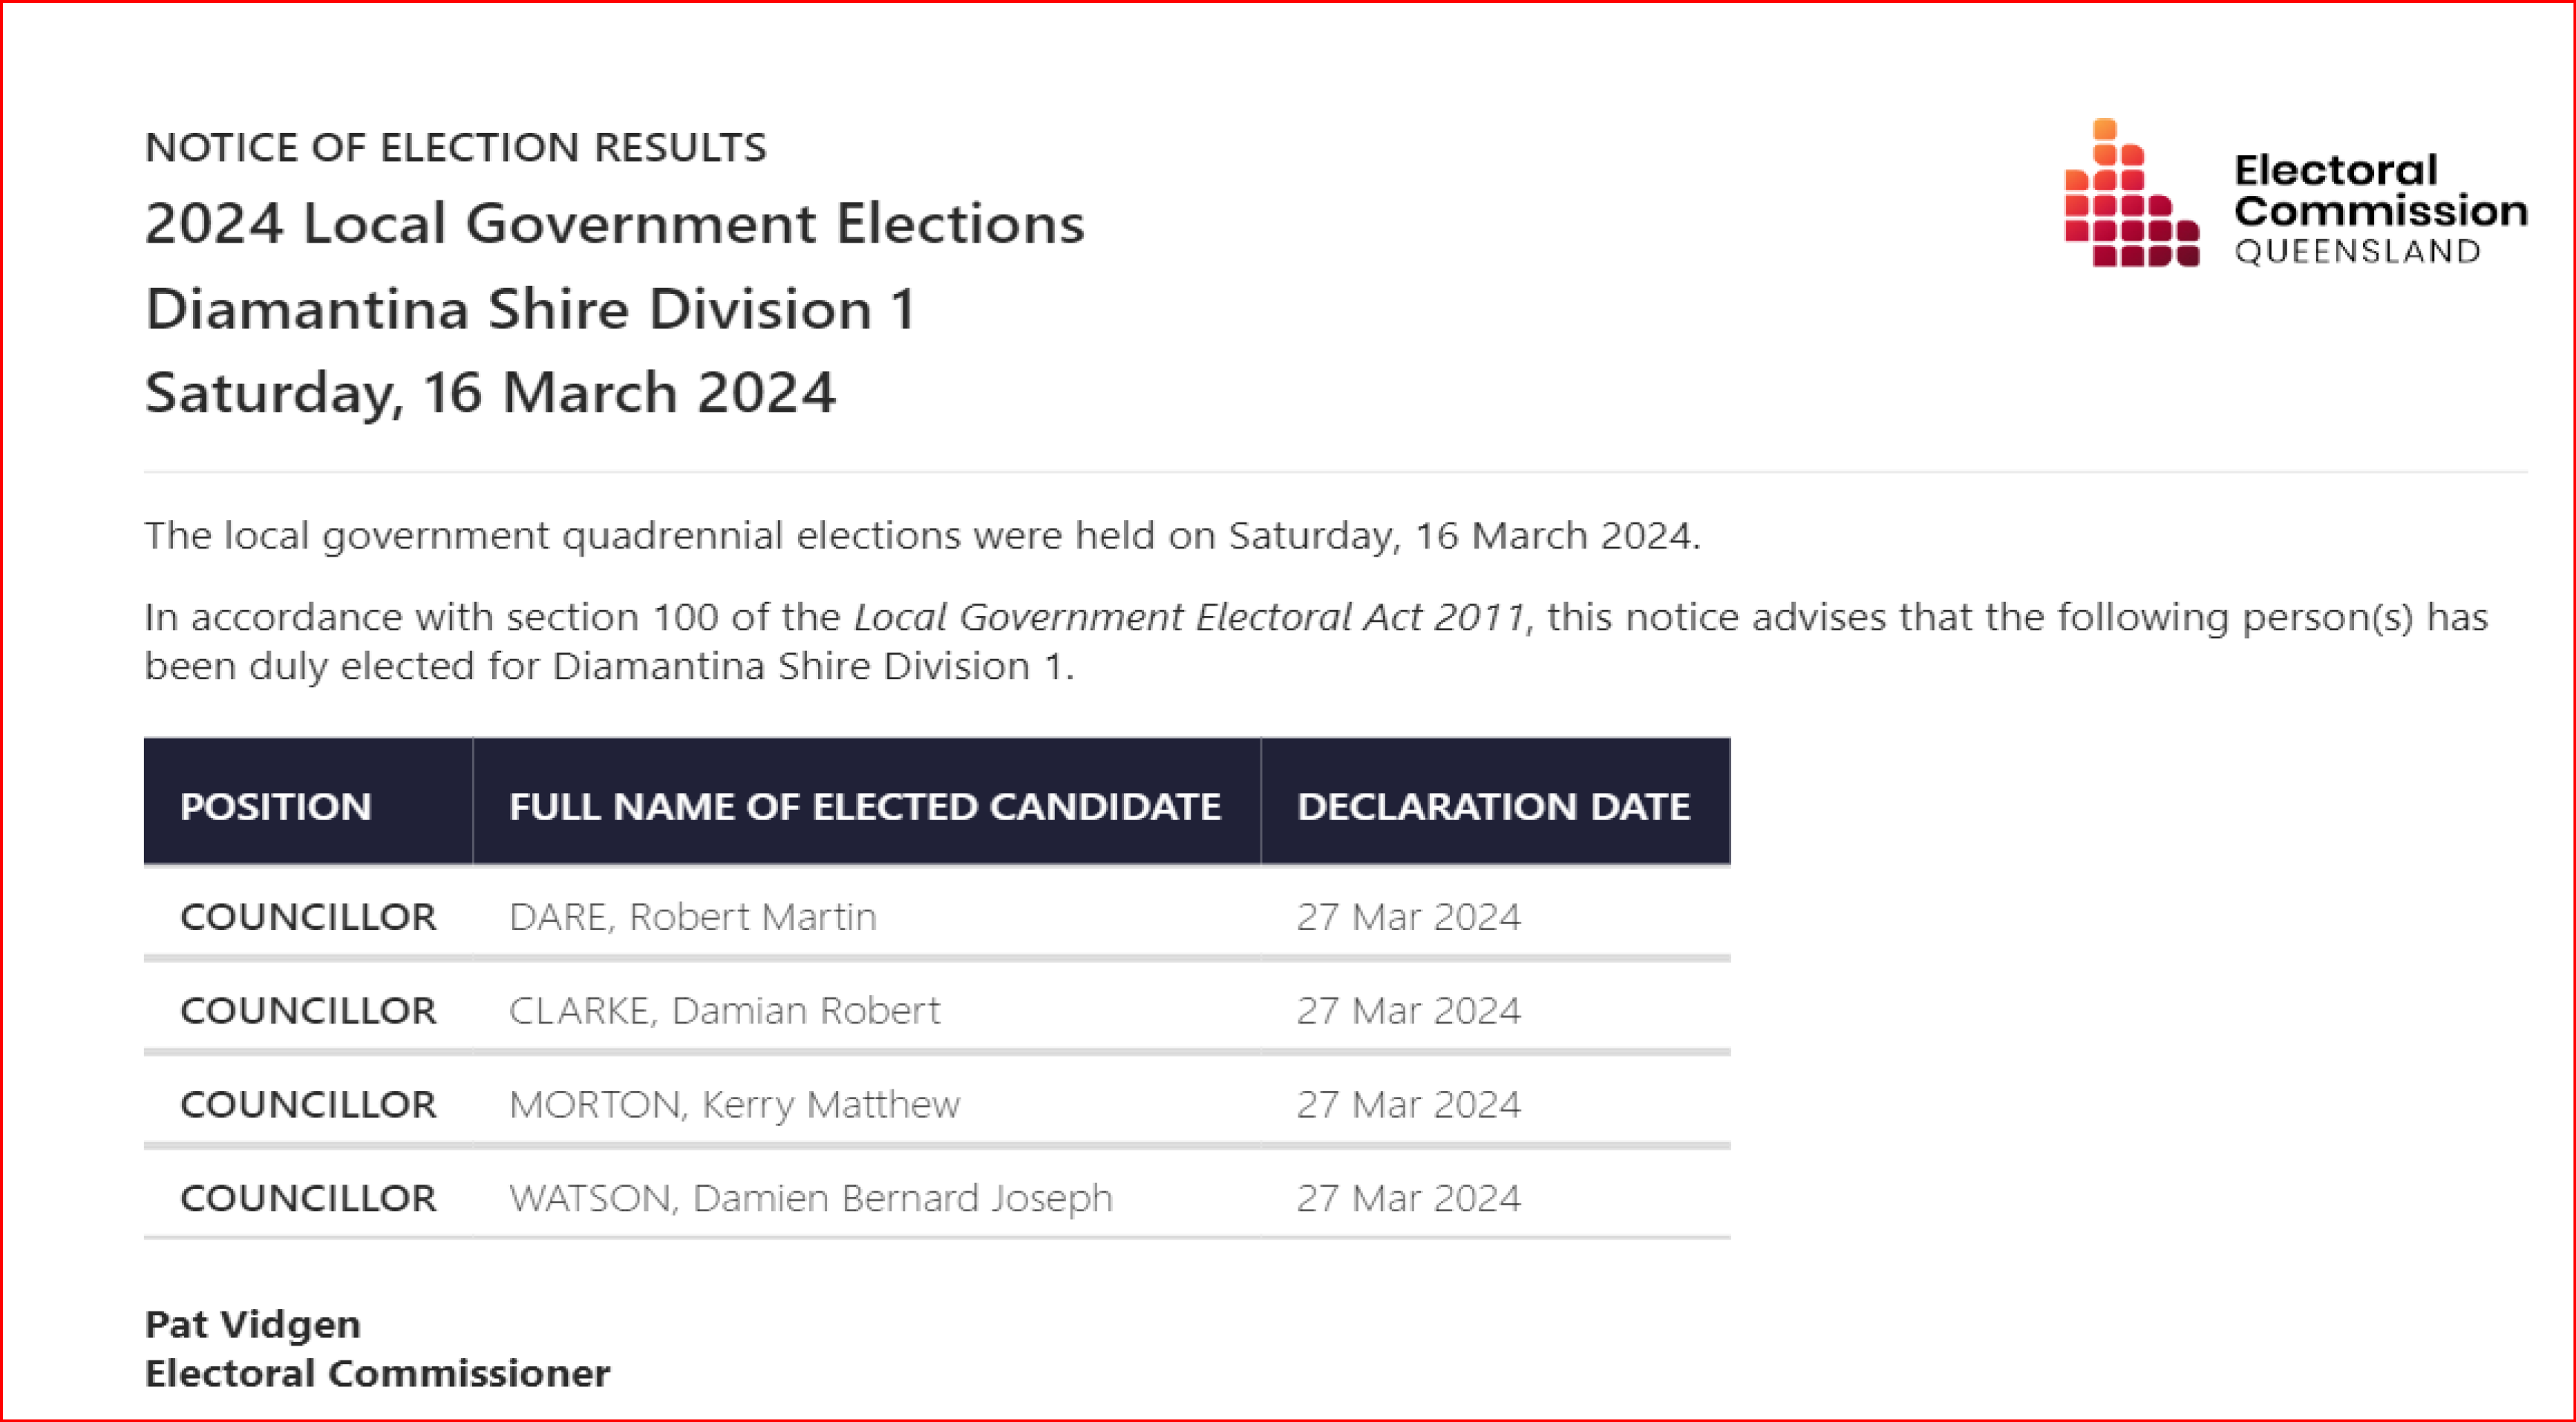 2024 Notice of Election Results